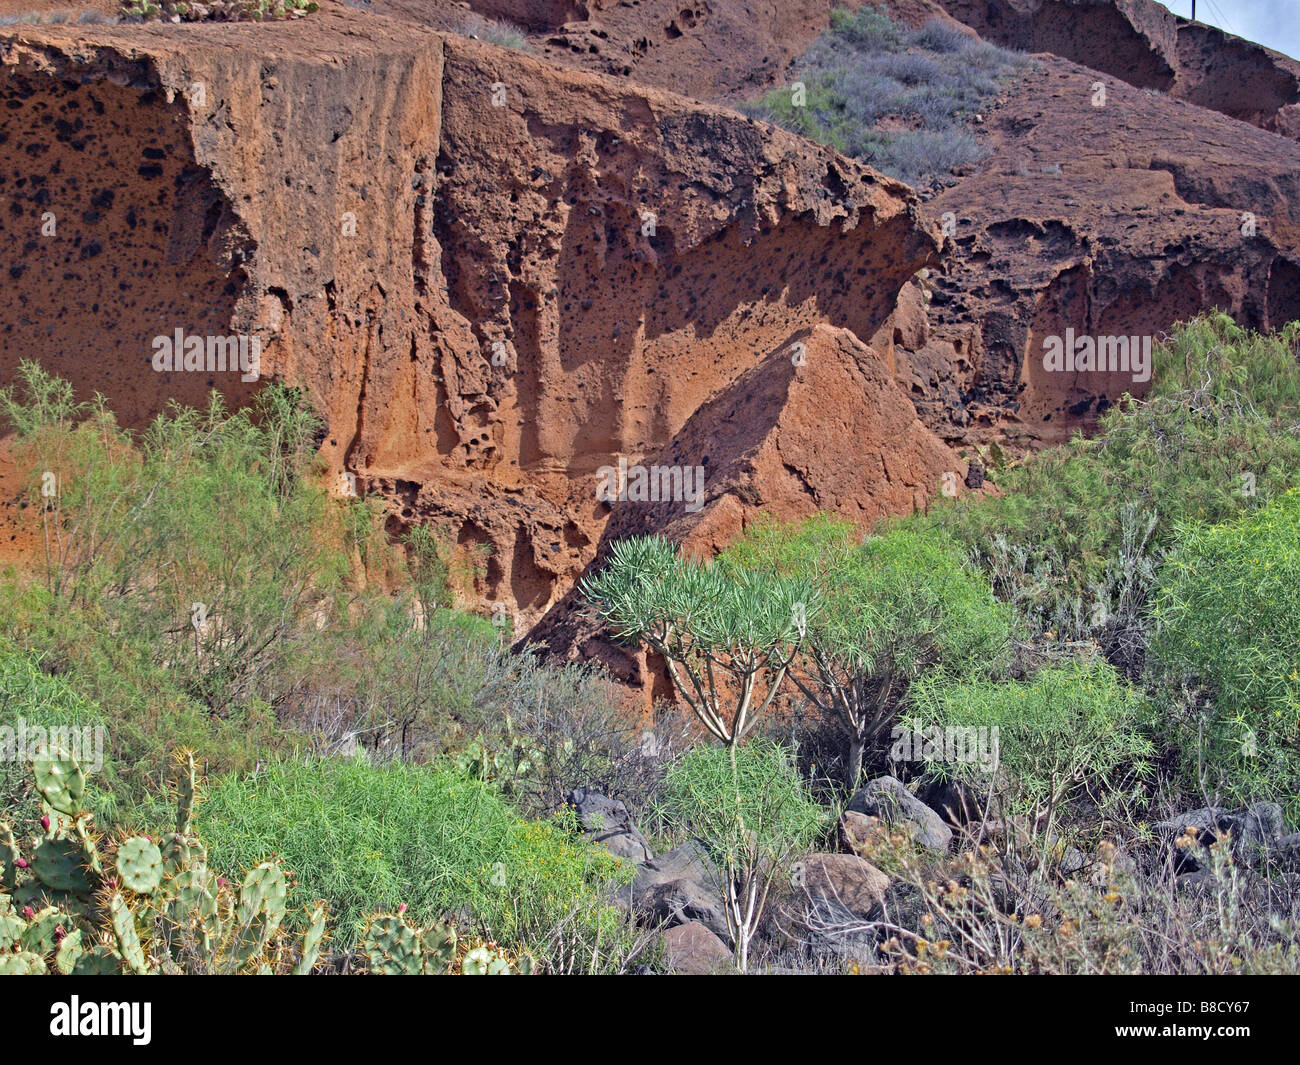 Volcanic rock with scrub land in the forground at Playa Parasio, Costa Adeje, Tenerife. Stock Photo